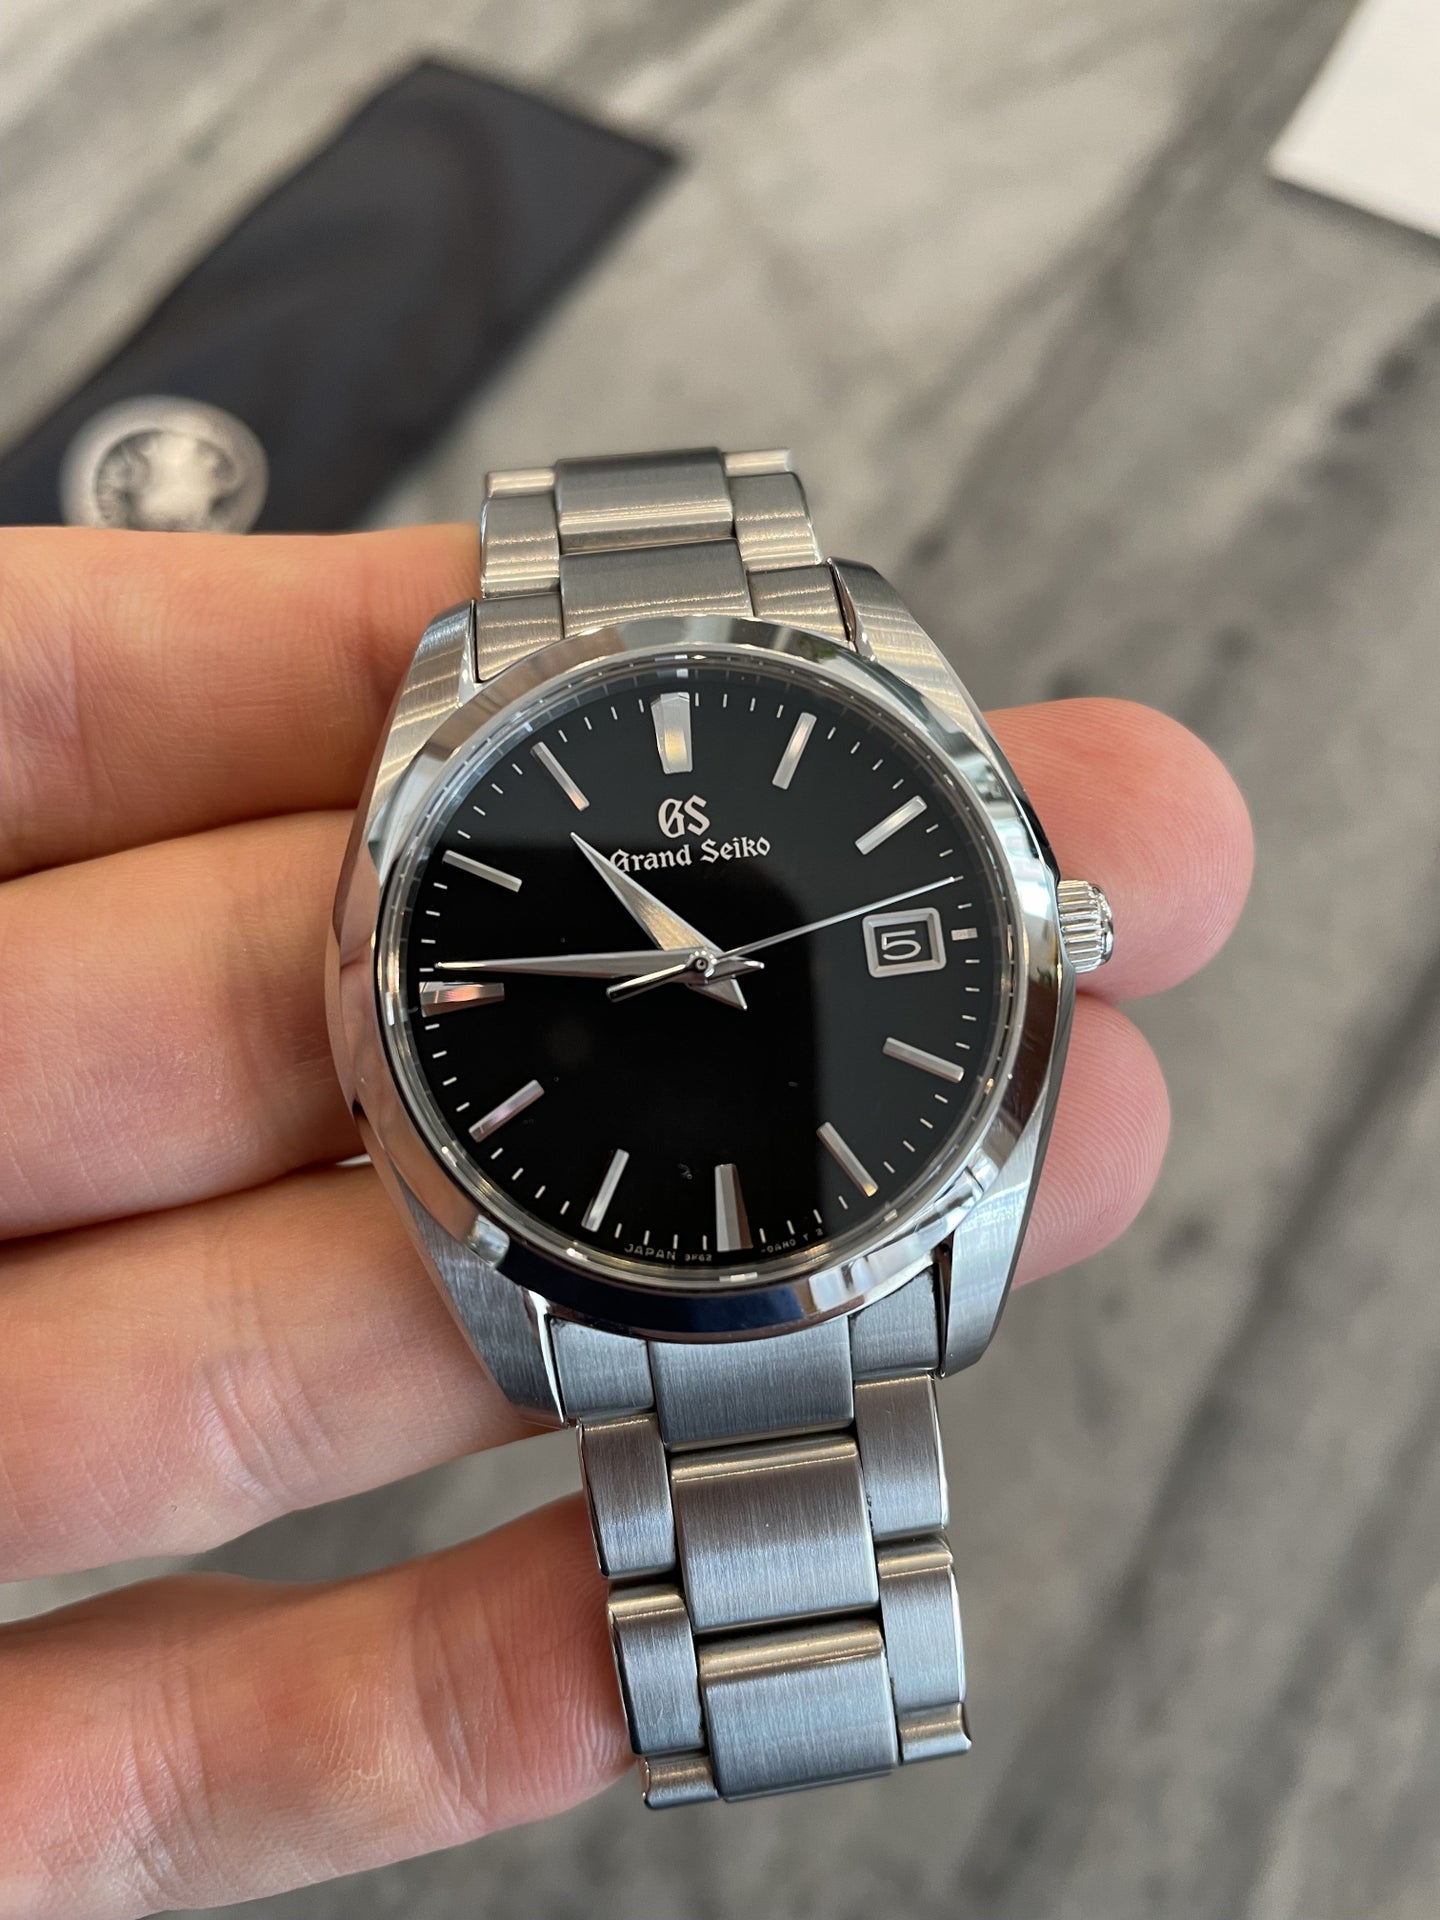 SOLD: Grand Seiko SBGX261 quartz / black dial - beautiful watch in  excellent condition | WatchUSeek Watch Forums